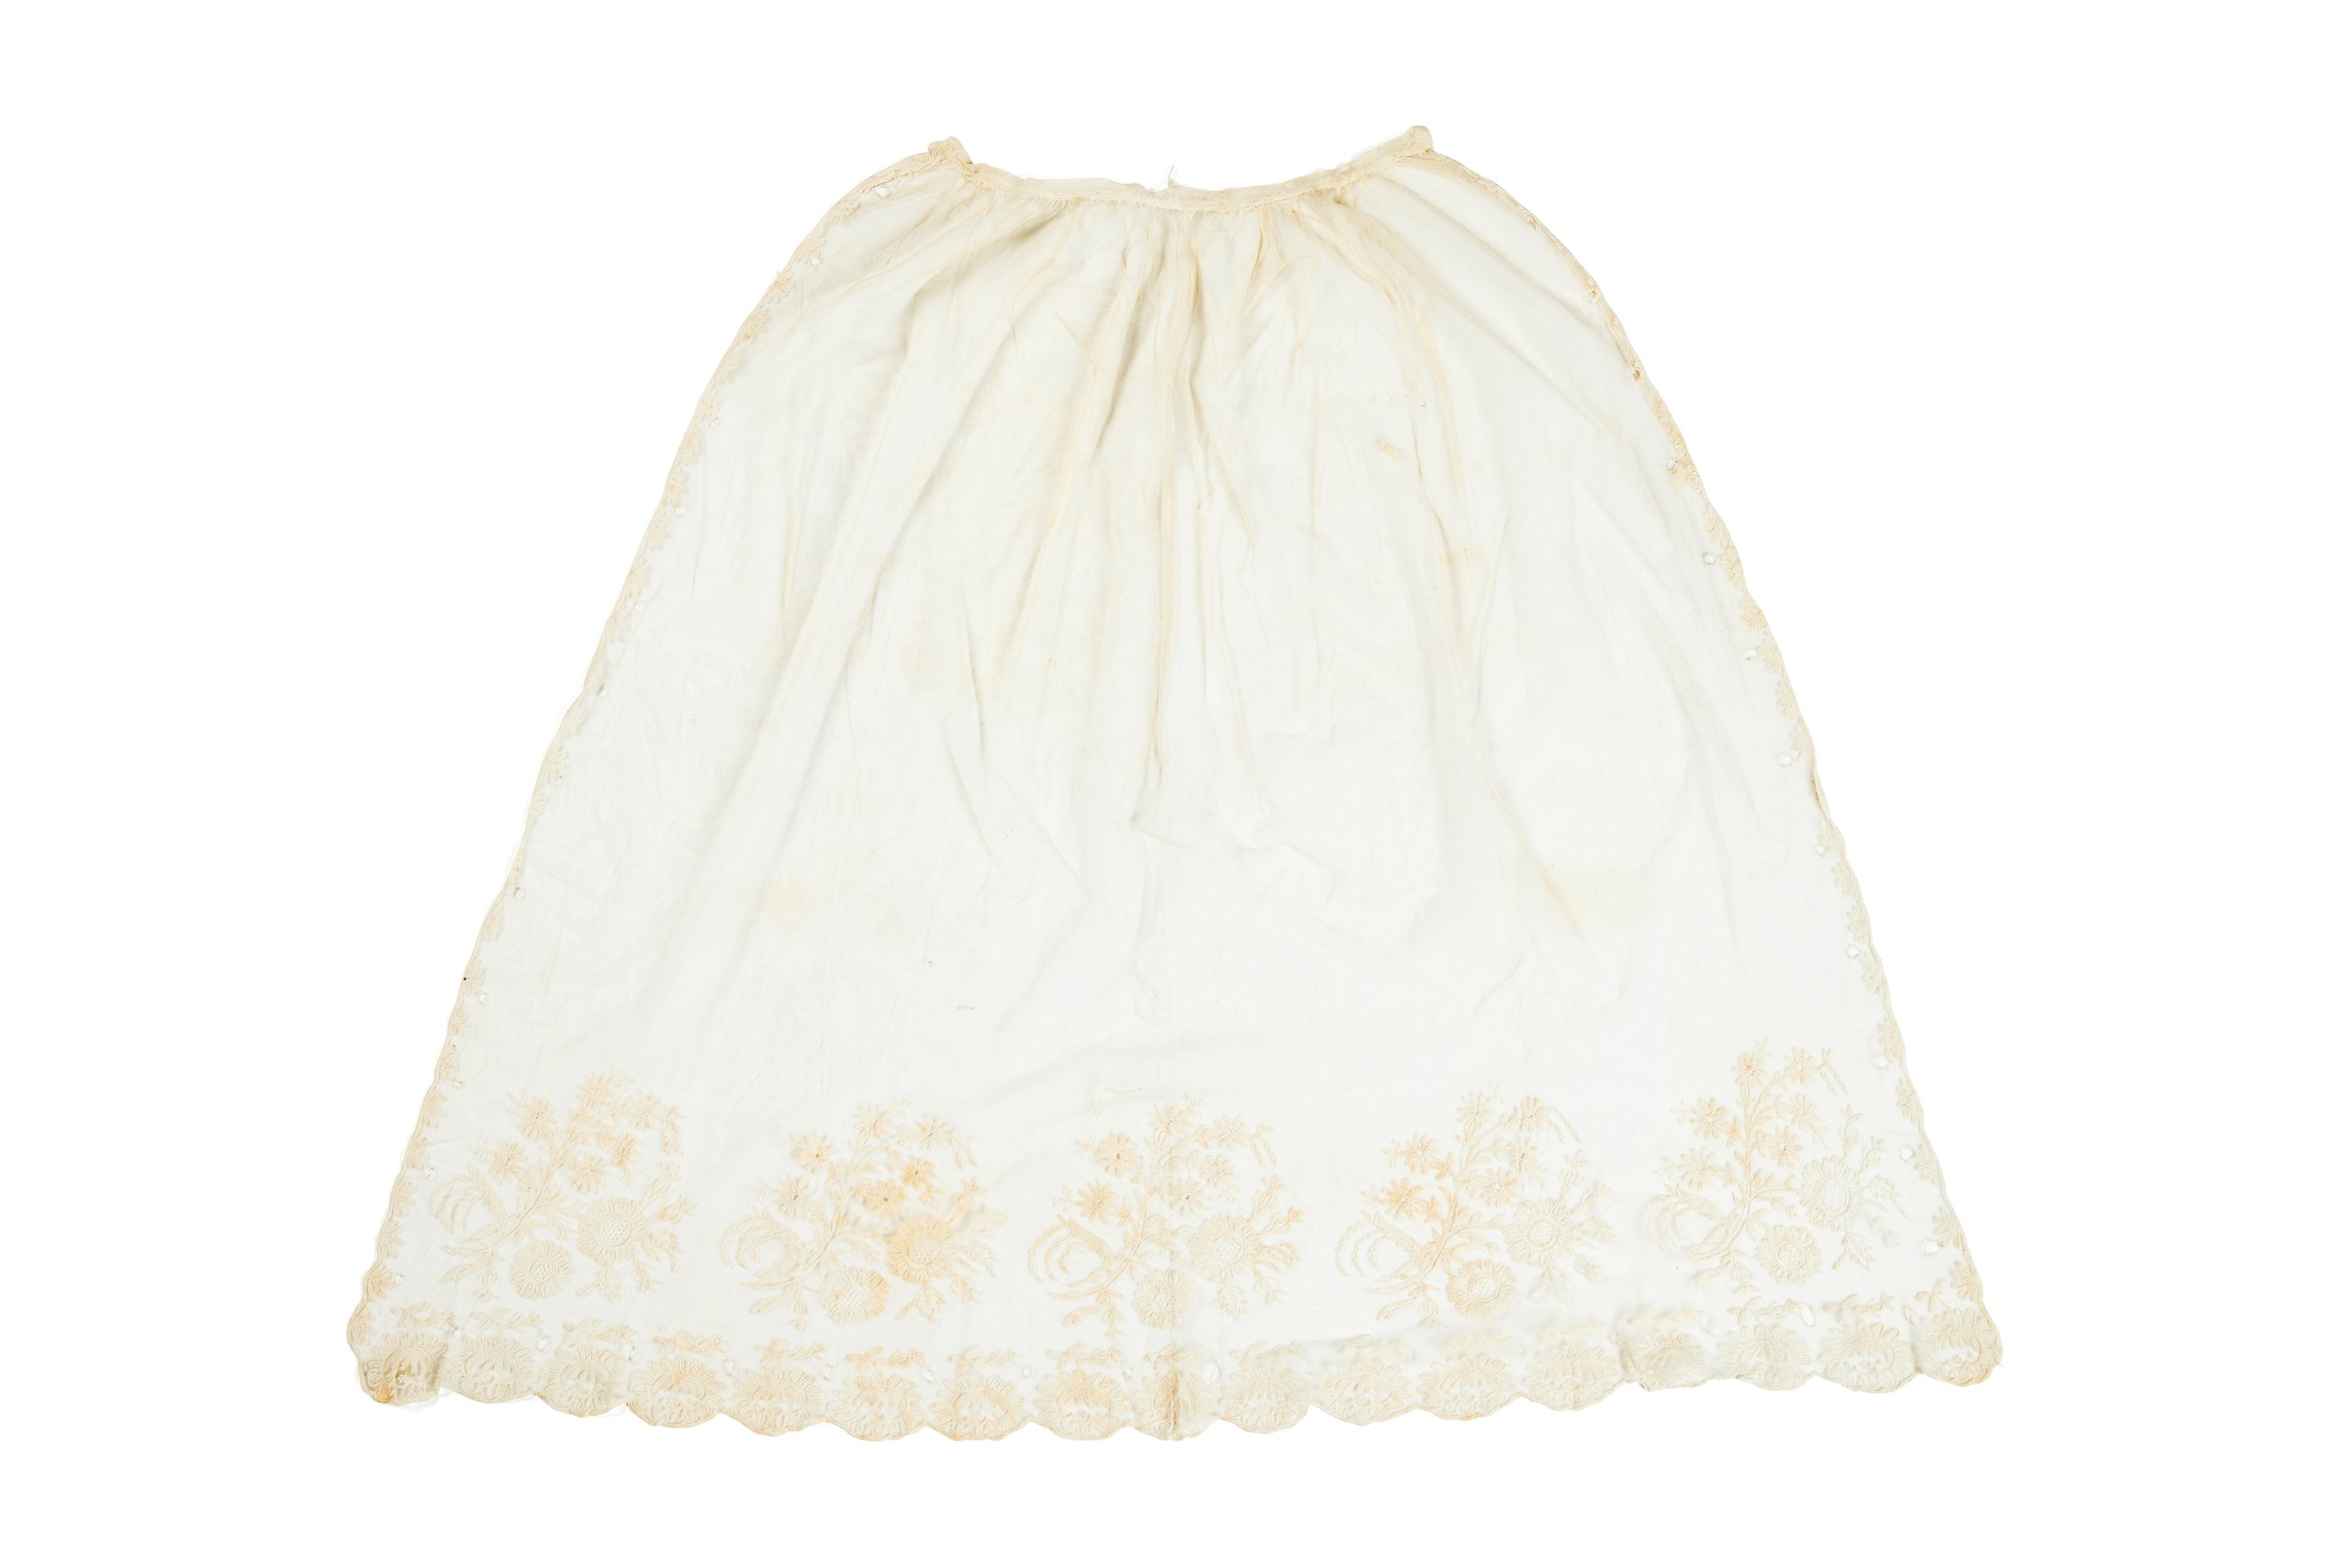 Embroidered net apron